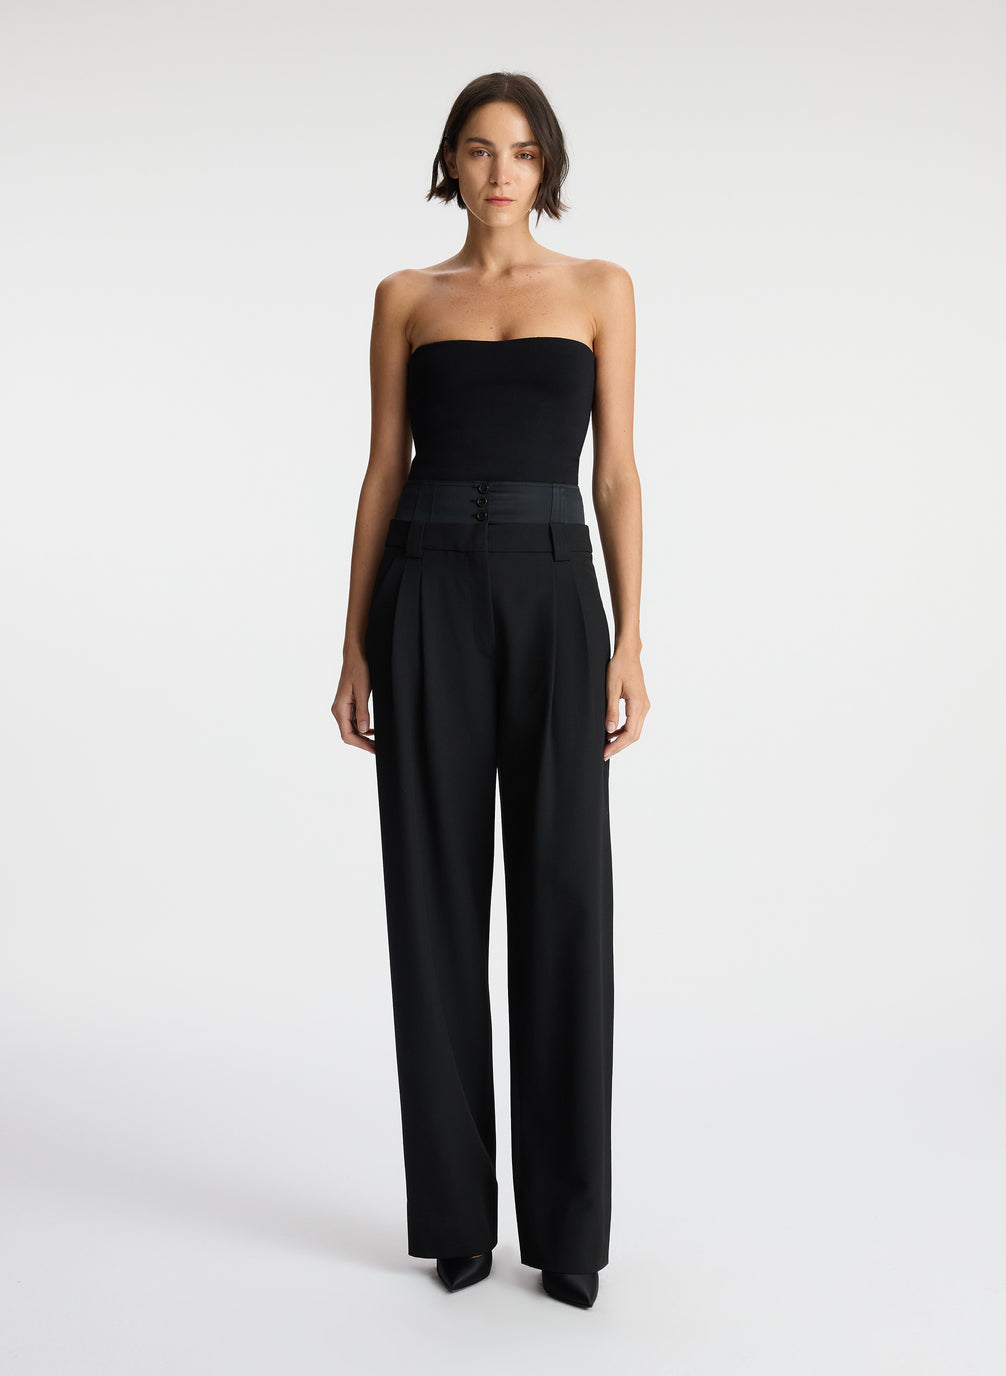 front view of woman wearing black strapless compact knit top and black satin pants